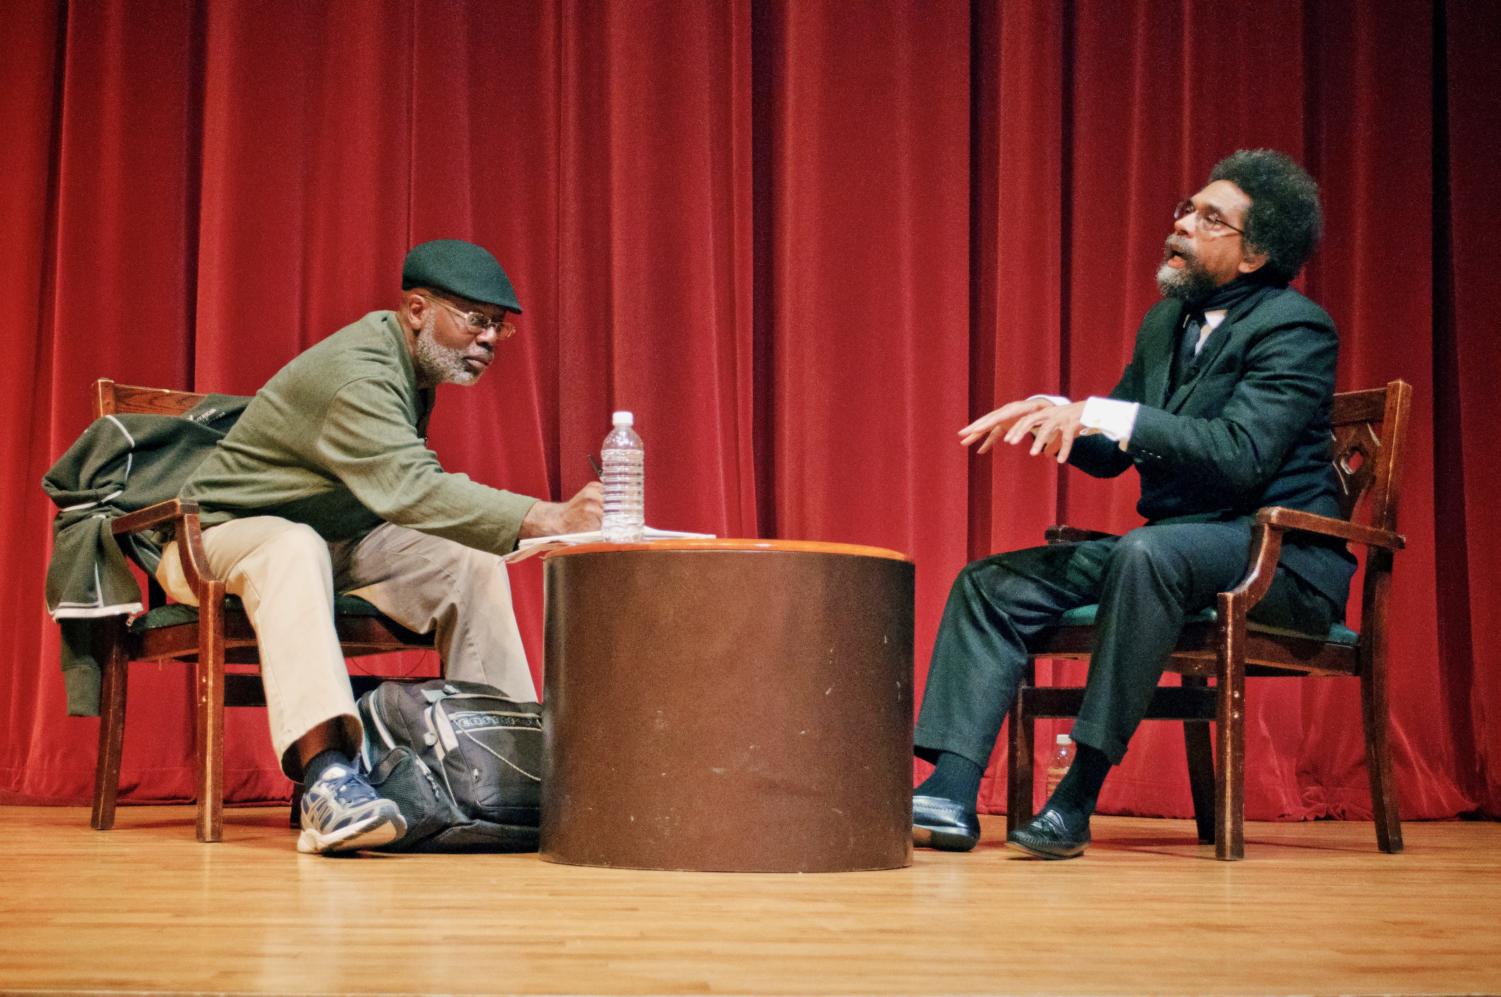 Carl Dix and Cornel West discuss unique obstacles facing our nation’s youth and what potential solutions can be brought to bear in resolving them at Mandel Hall on Monday evening.